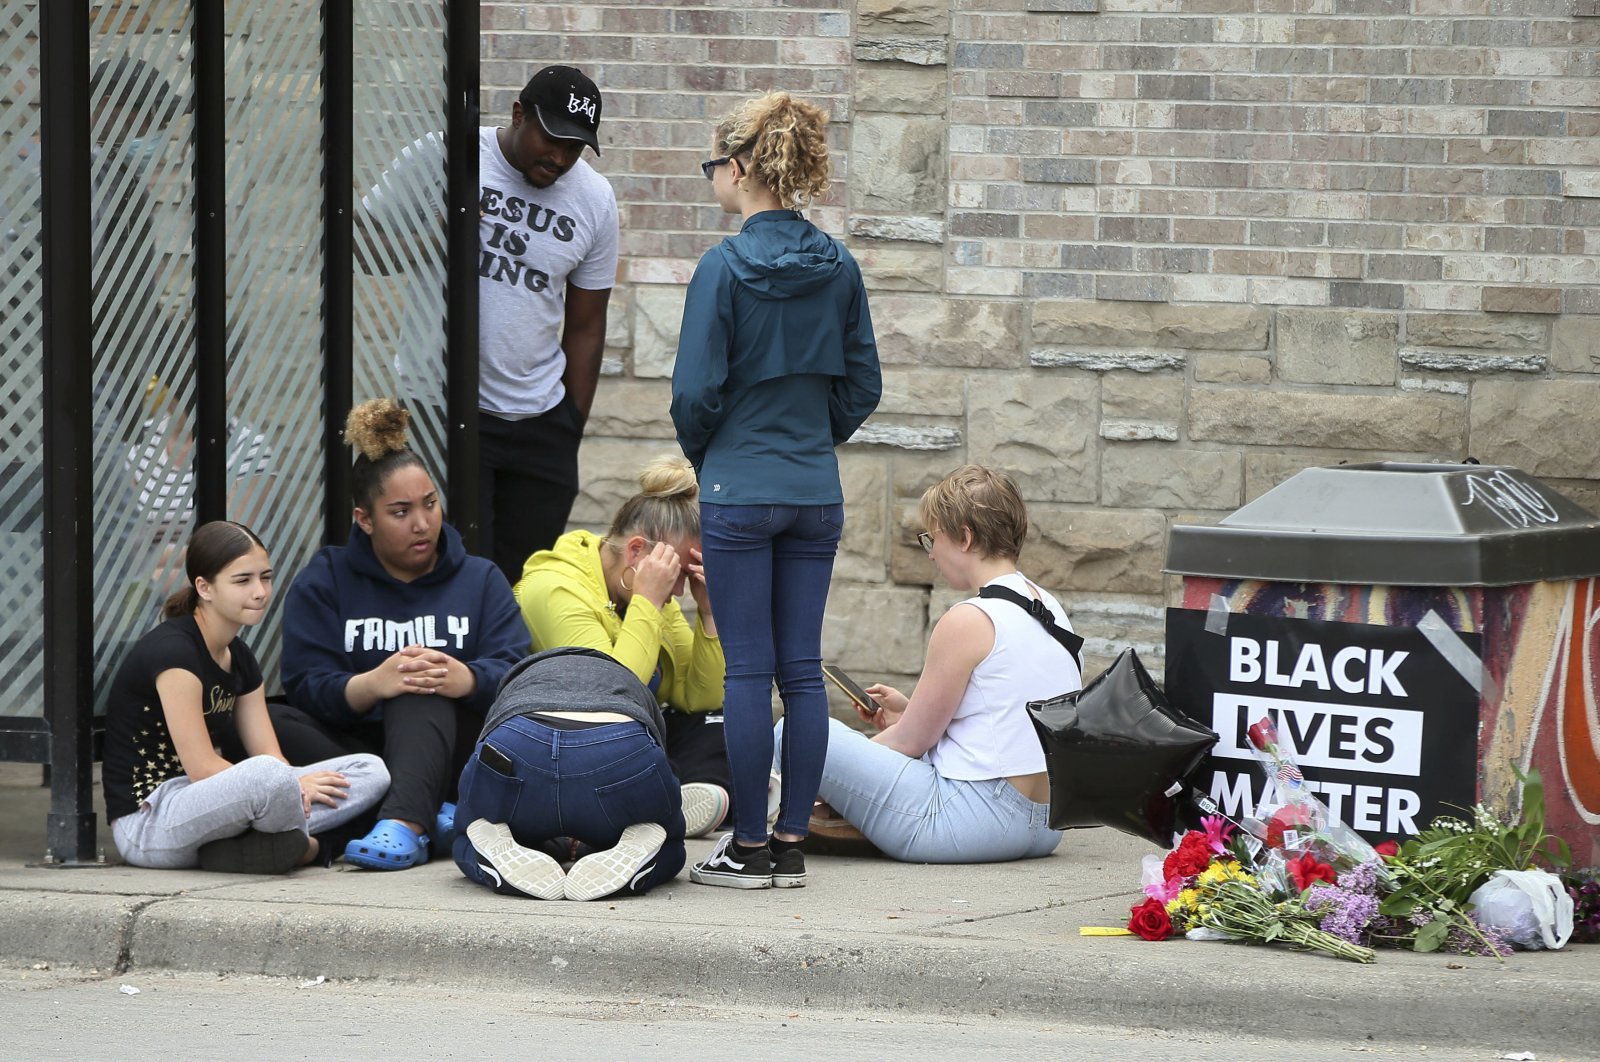 Mourners gather around a makeshift memorial near where a black man was arrested by police and later died, Minneapolis, Minnesota, May 26, 2020. (AP Photo)